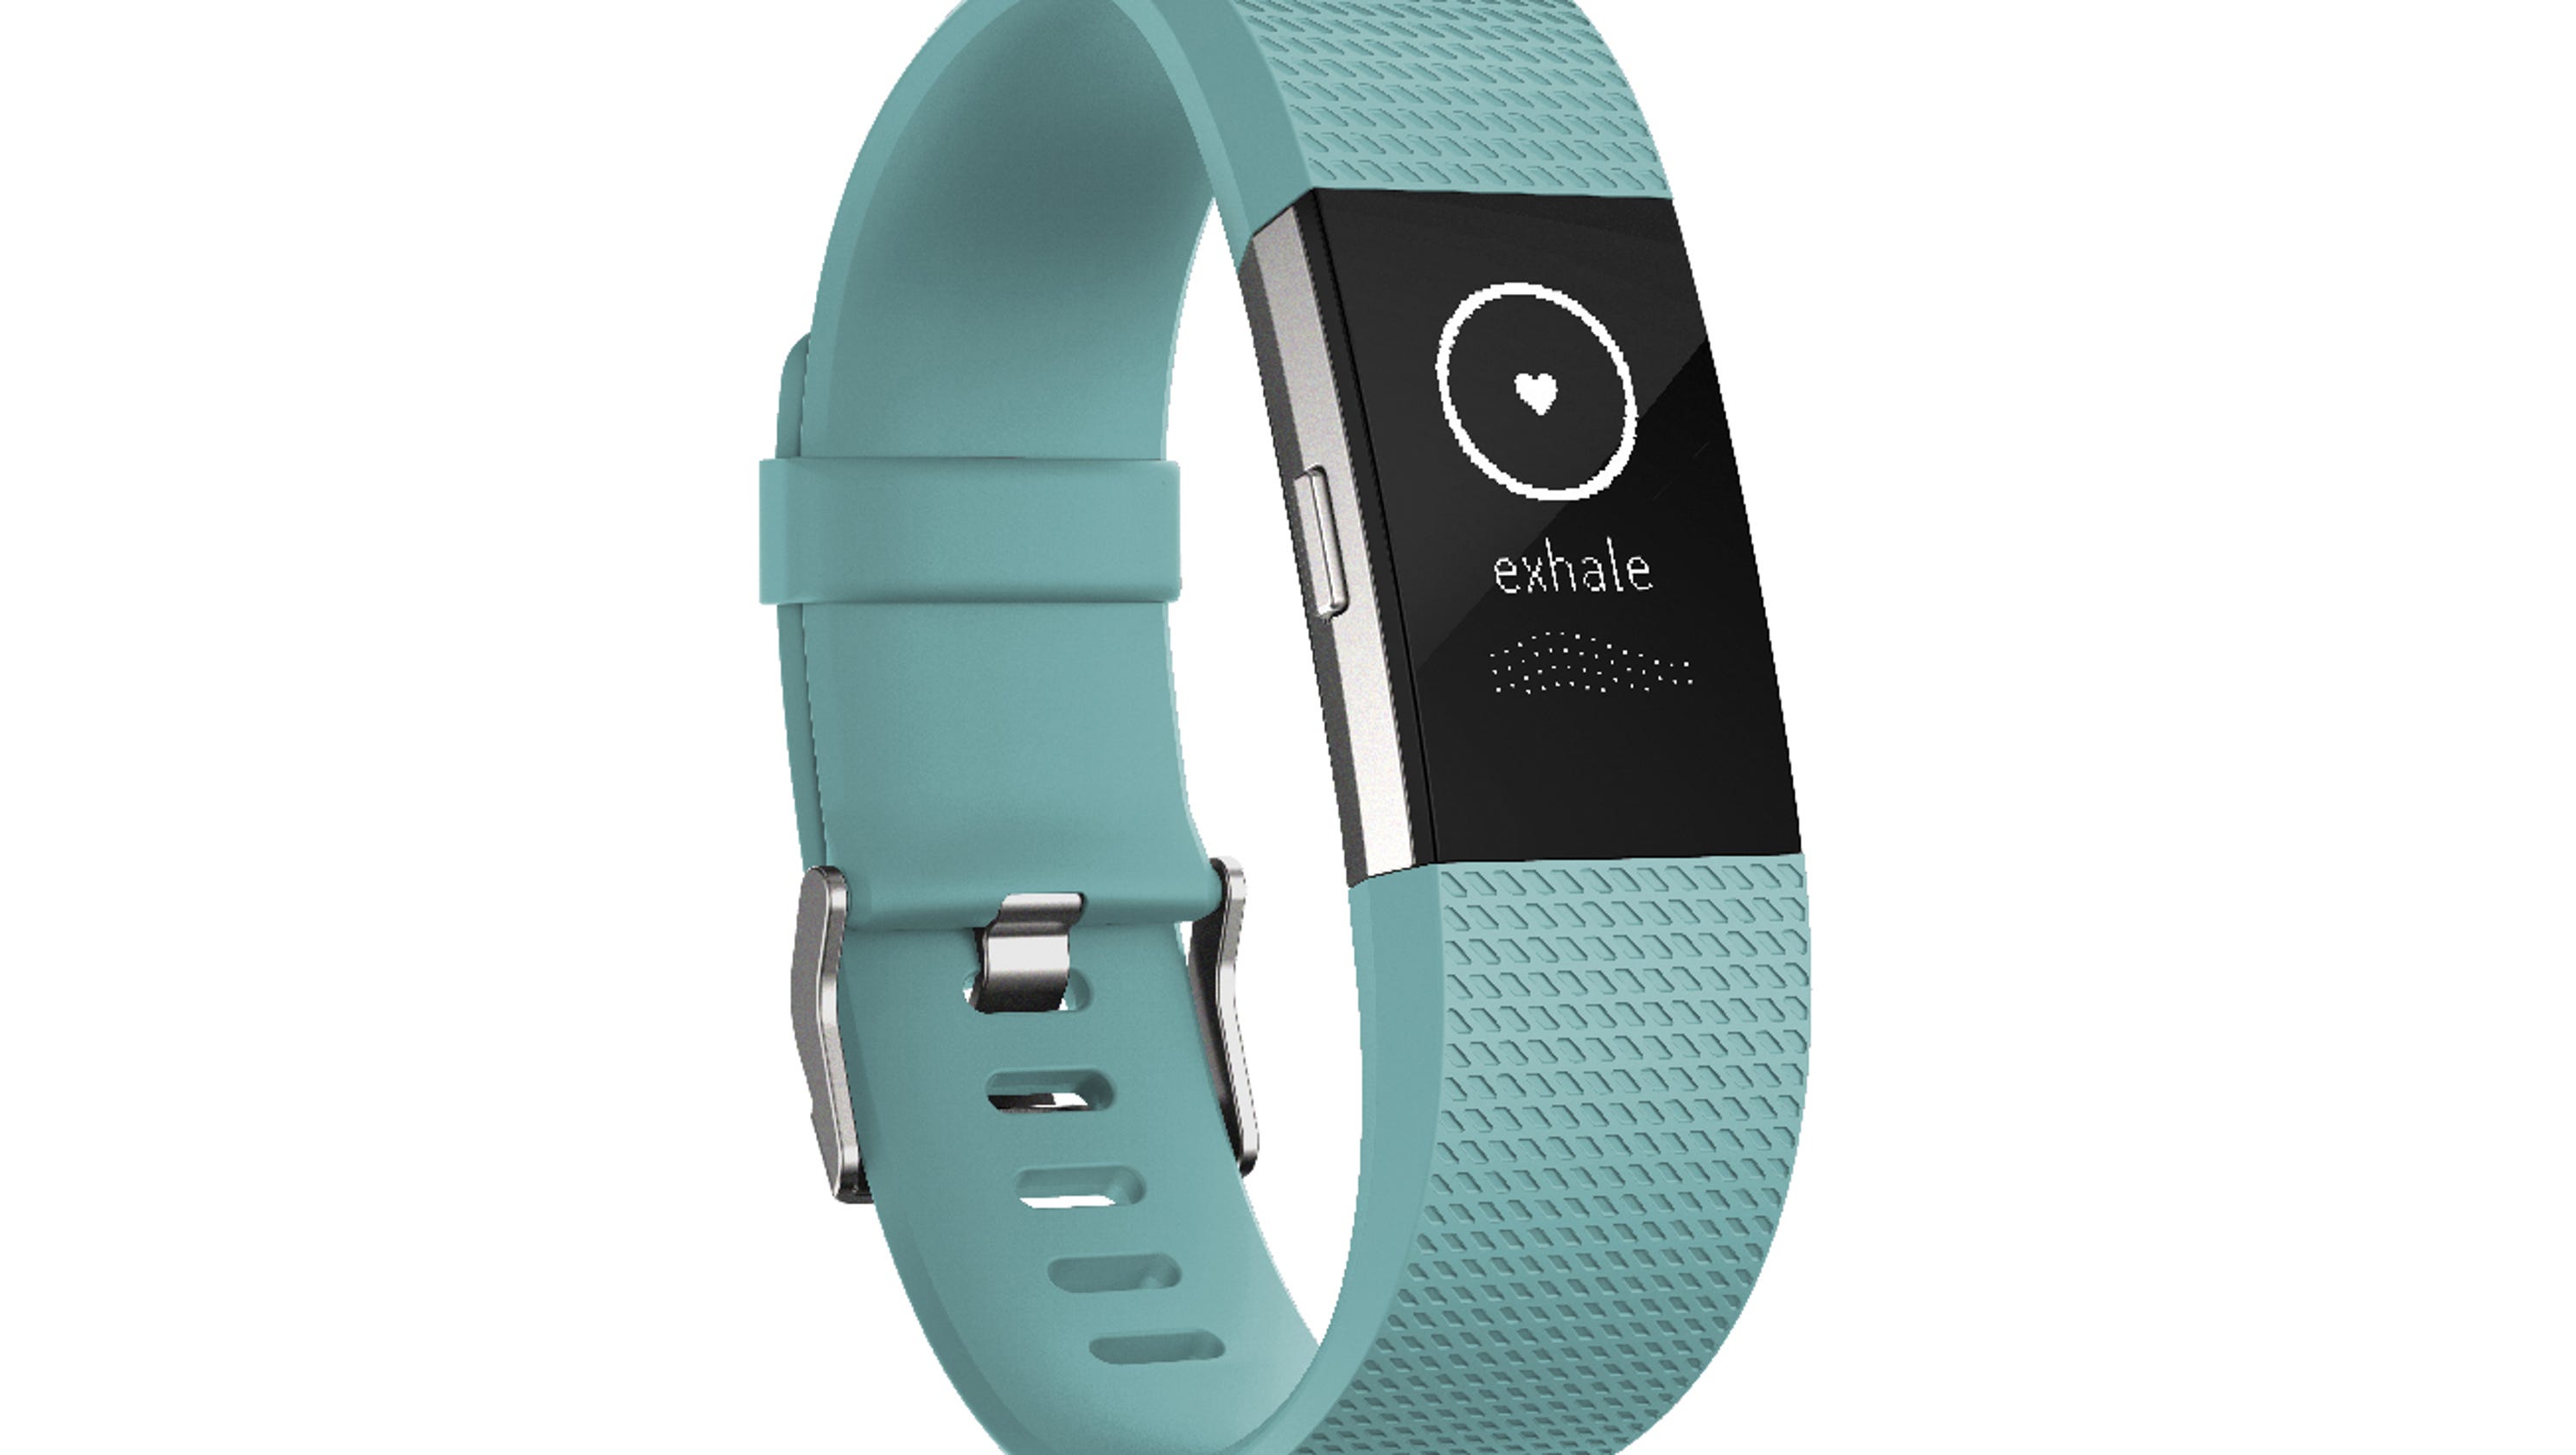 Fitbit stock tumbles 11% on concerns exercise buffs don't want tracker3200 x 1680